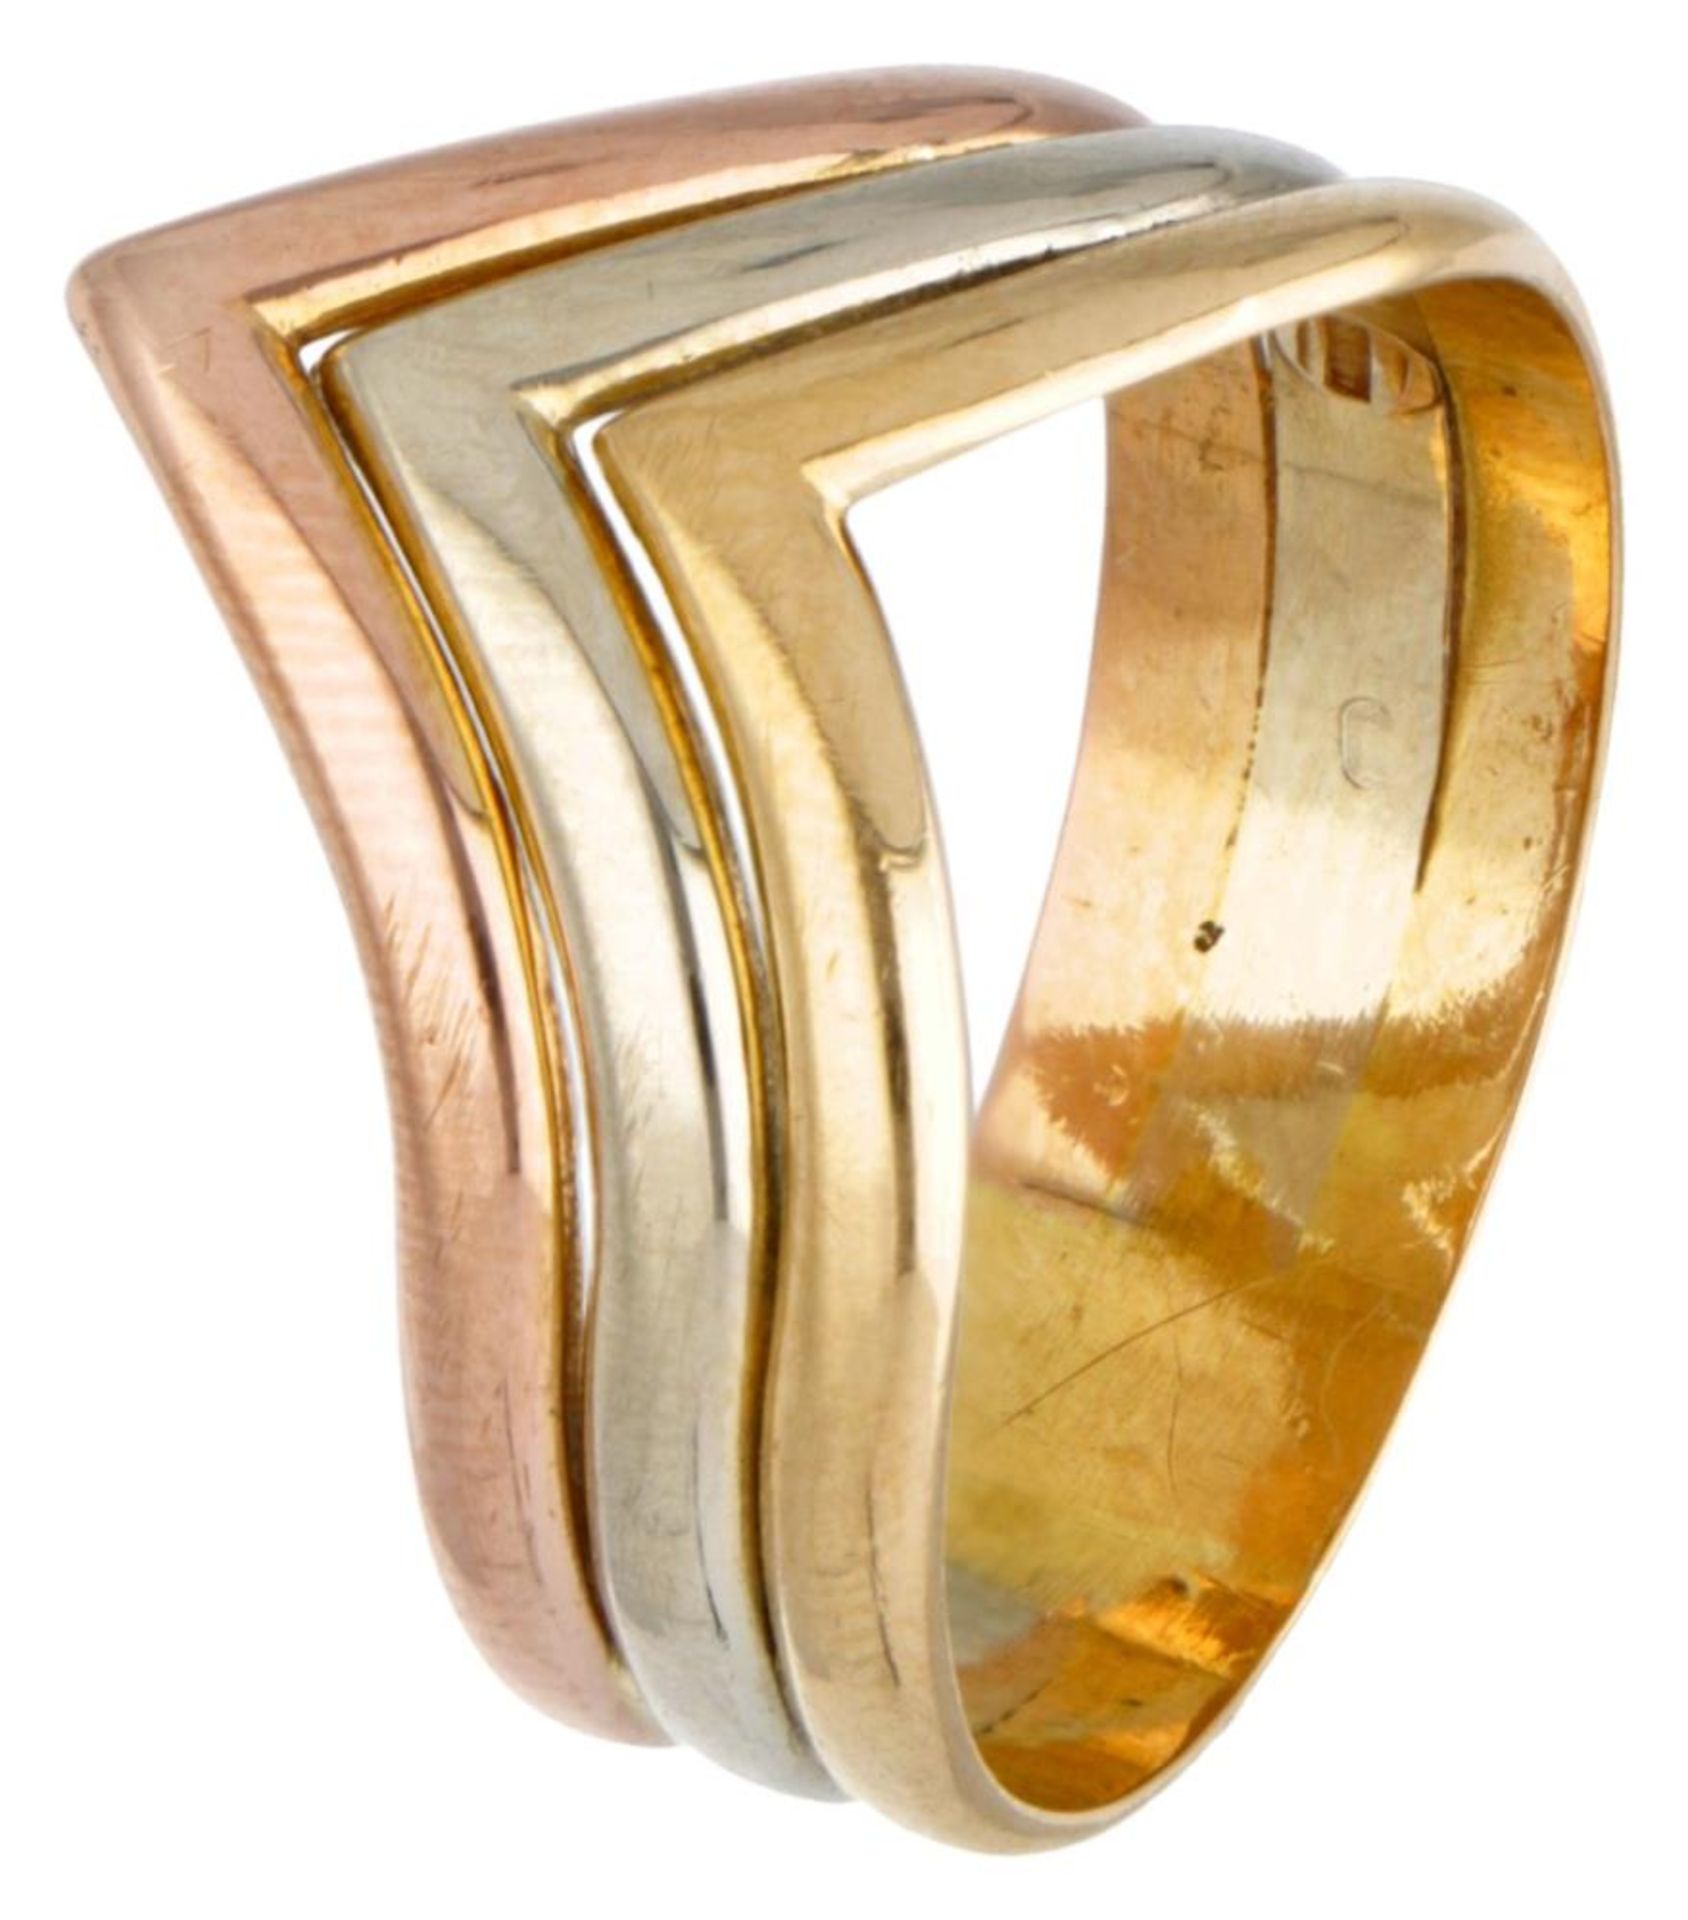 18K. Tricolor gold Italian design ring with a V-shaped centerpiece.